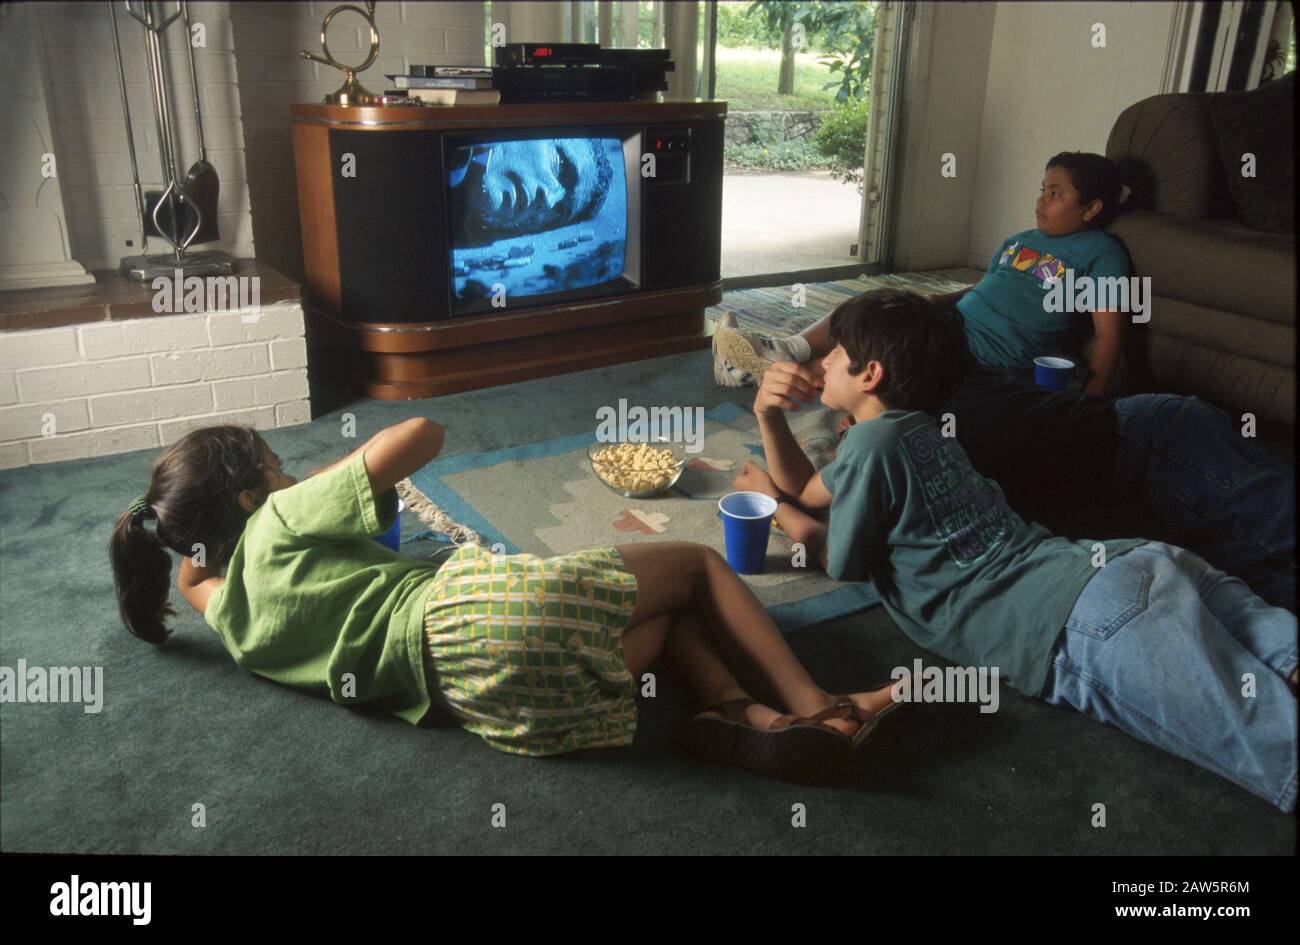 Children watch violent movie on television in home living room in Austin, Texas. Stock Photo